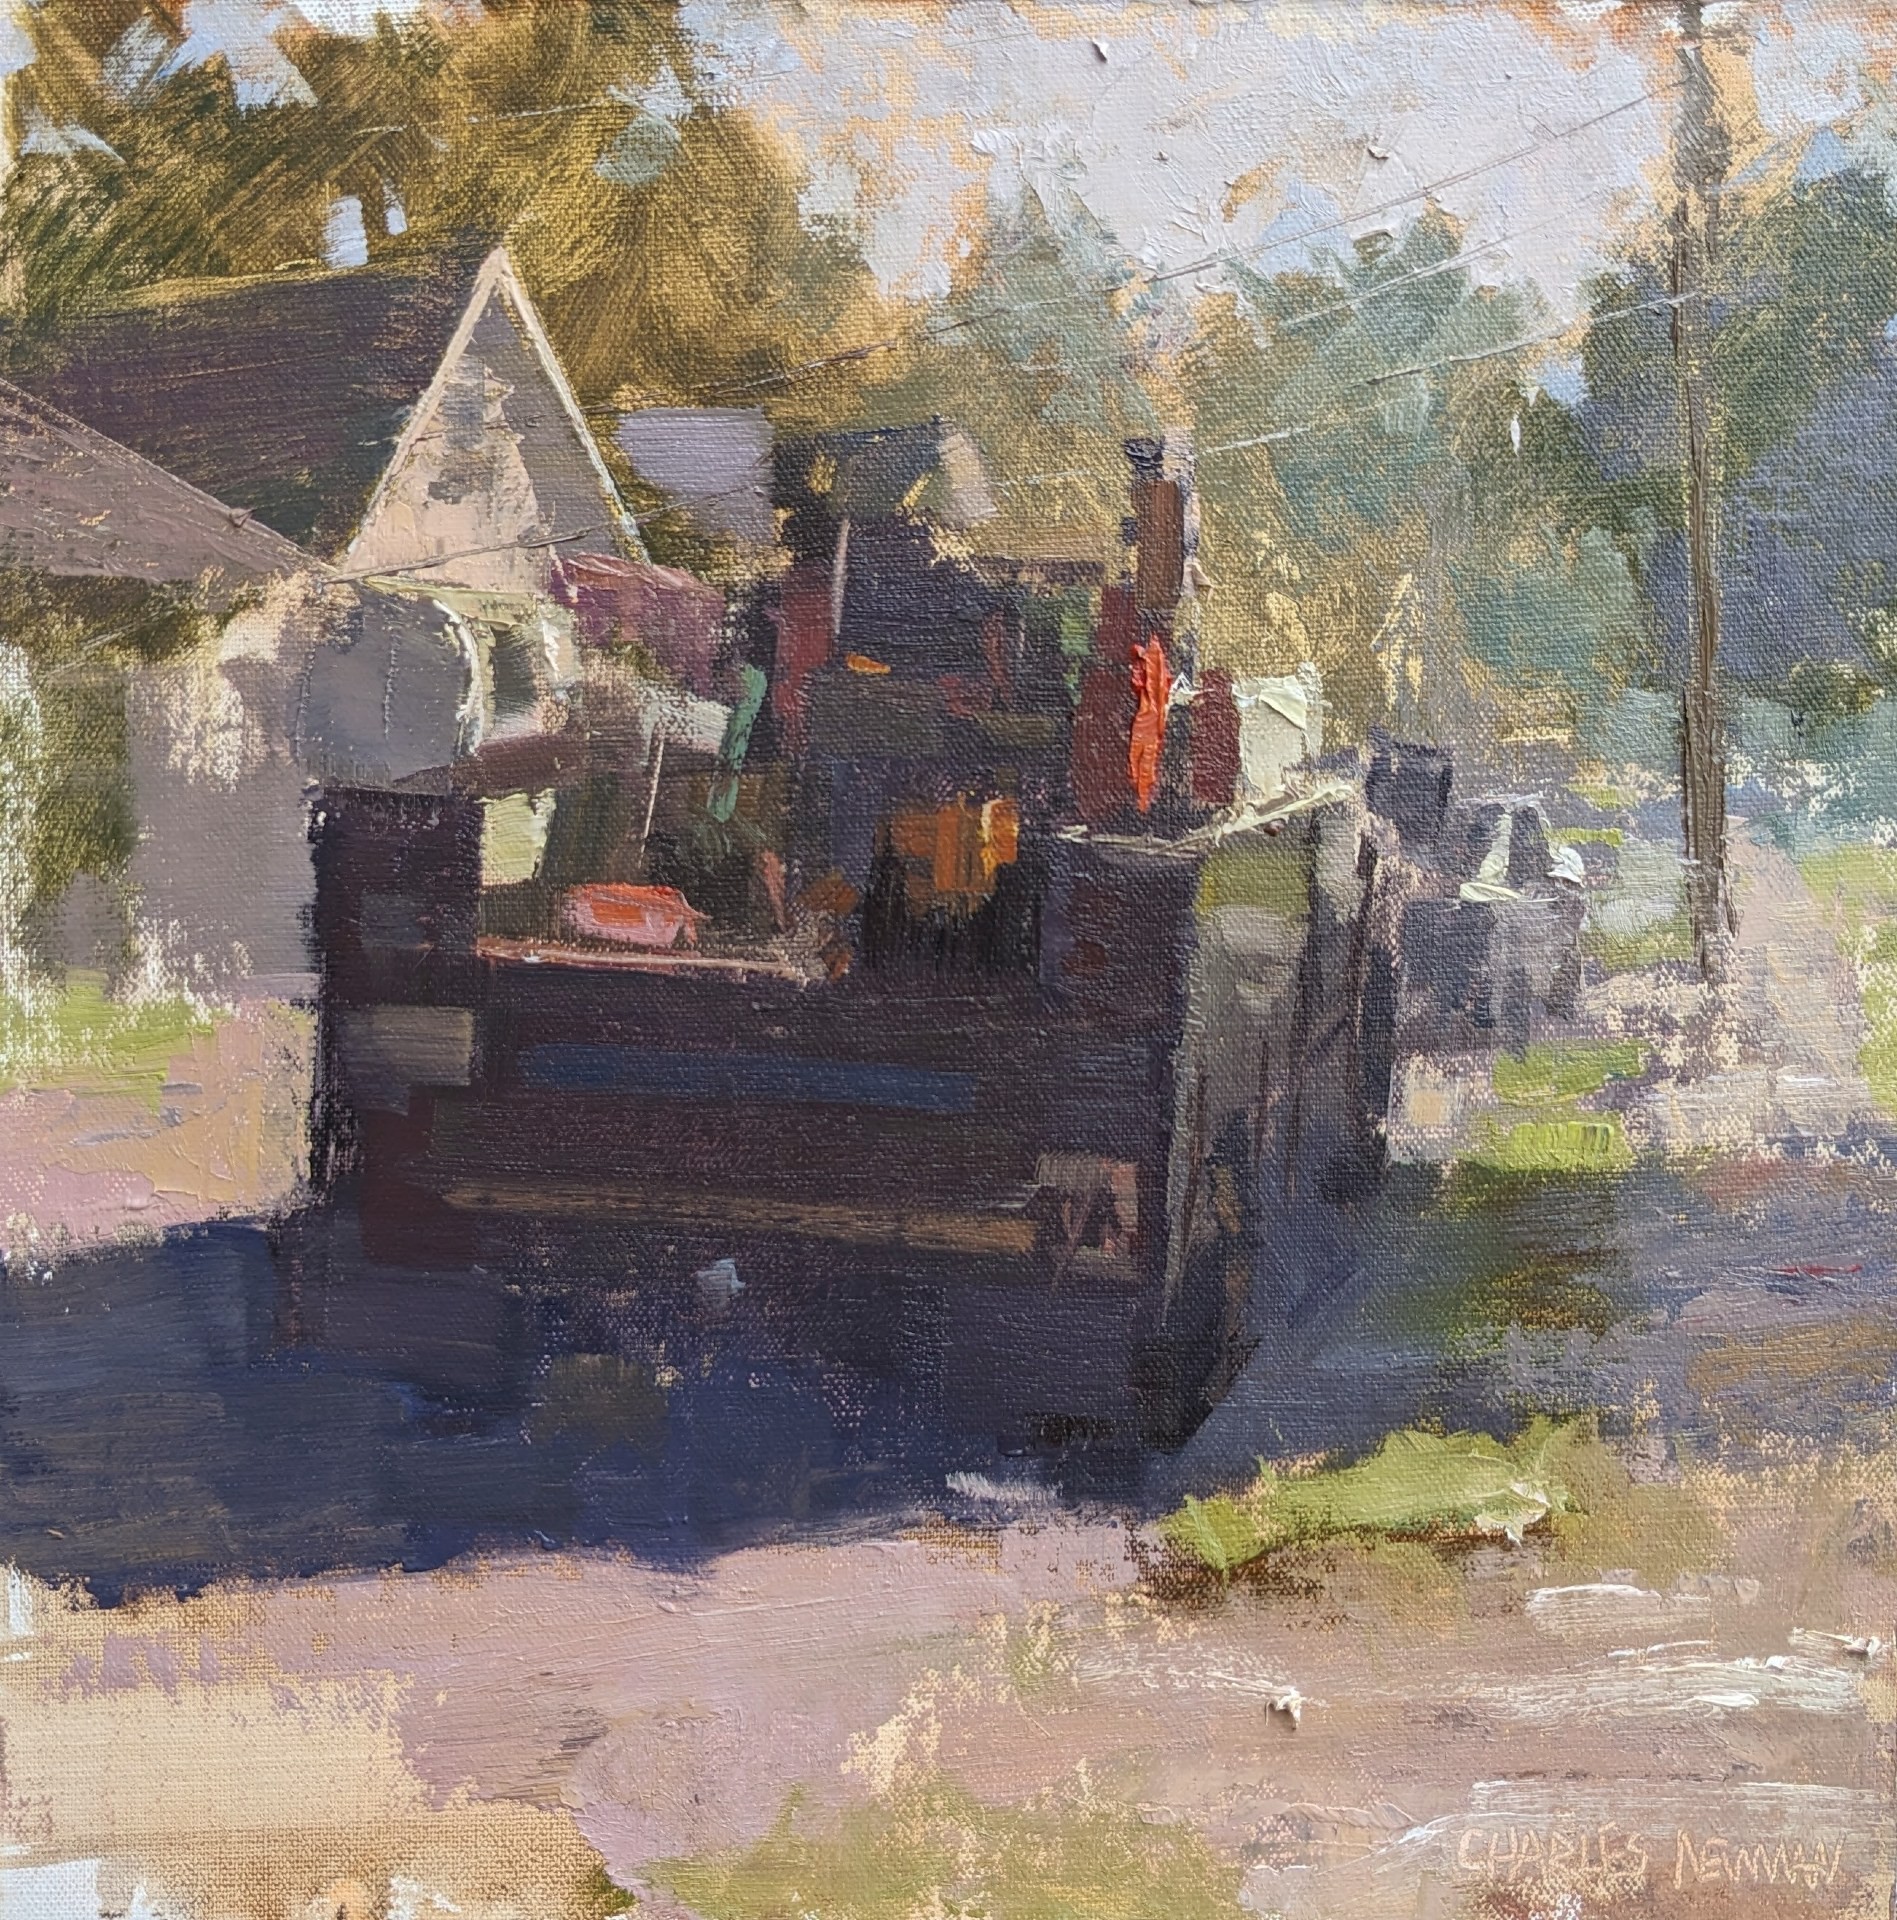 13th Annual PleinAir Salon Annual Competition Top 25 Finalist Charles Newman oil painting of utility truck